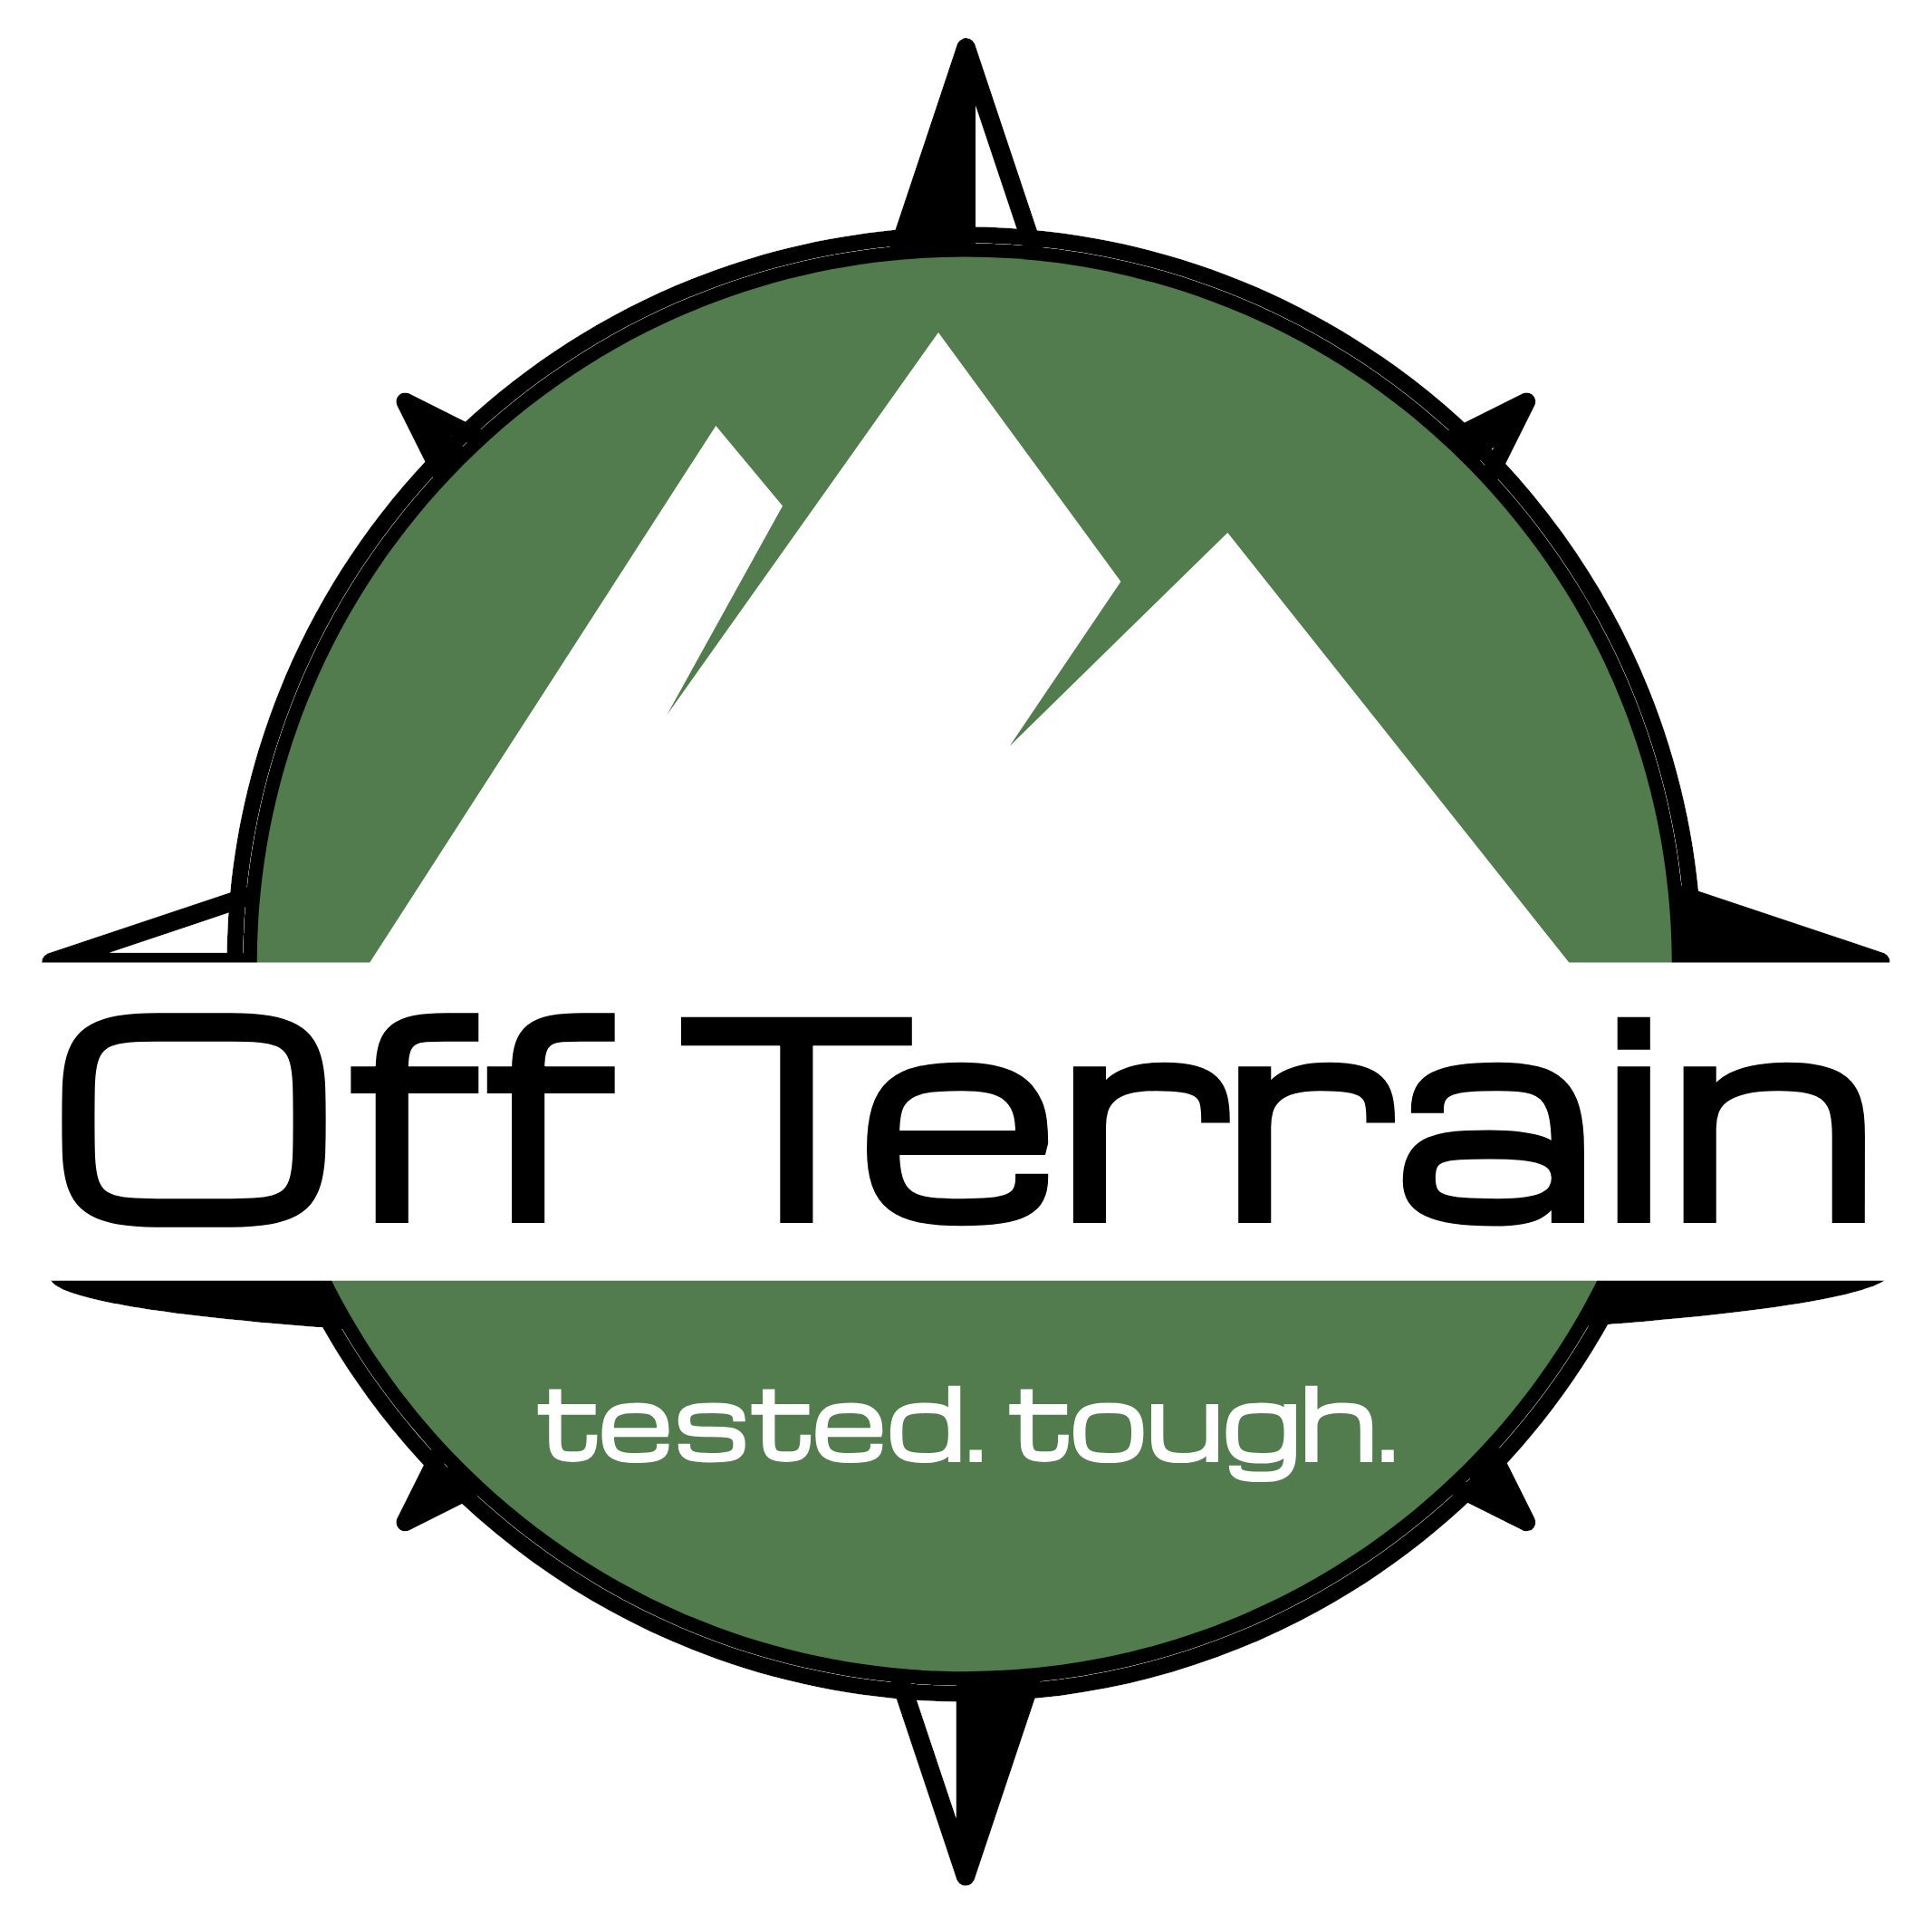 Off Terrain 🇺🇸 | Portland, OR
⛰ Overbuilt Truck, Jeep, & 4WD gear
🏁 Designed for Offroad & Overlanding
⭐️ Tested. Tough.
🤘 #SEMA2019
FOLLOW | LIKE | SHARE